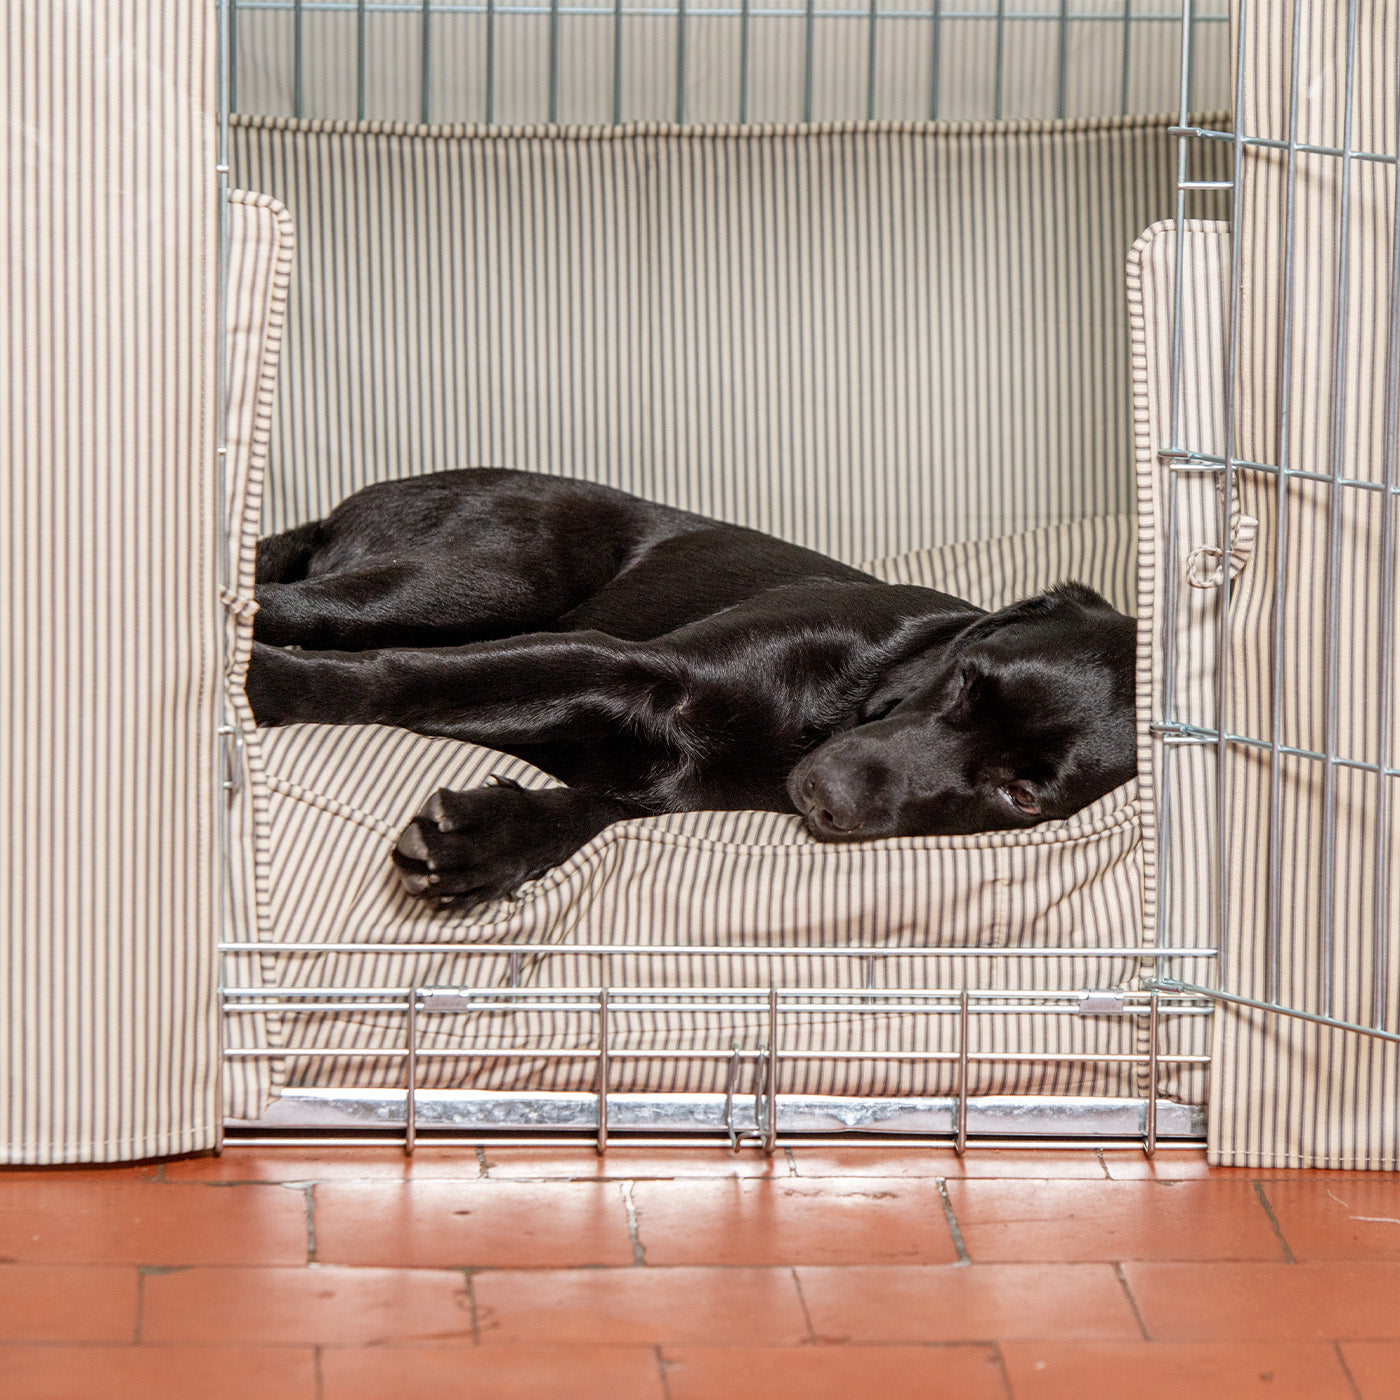 Luxury Silver Dog Cage Set With Cushion, Bumper and Crate Cover. The Perfect Dog Crate For The Ultimate Naptime, Available Now at Lords & Labradors US